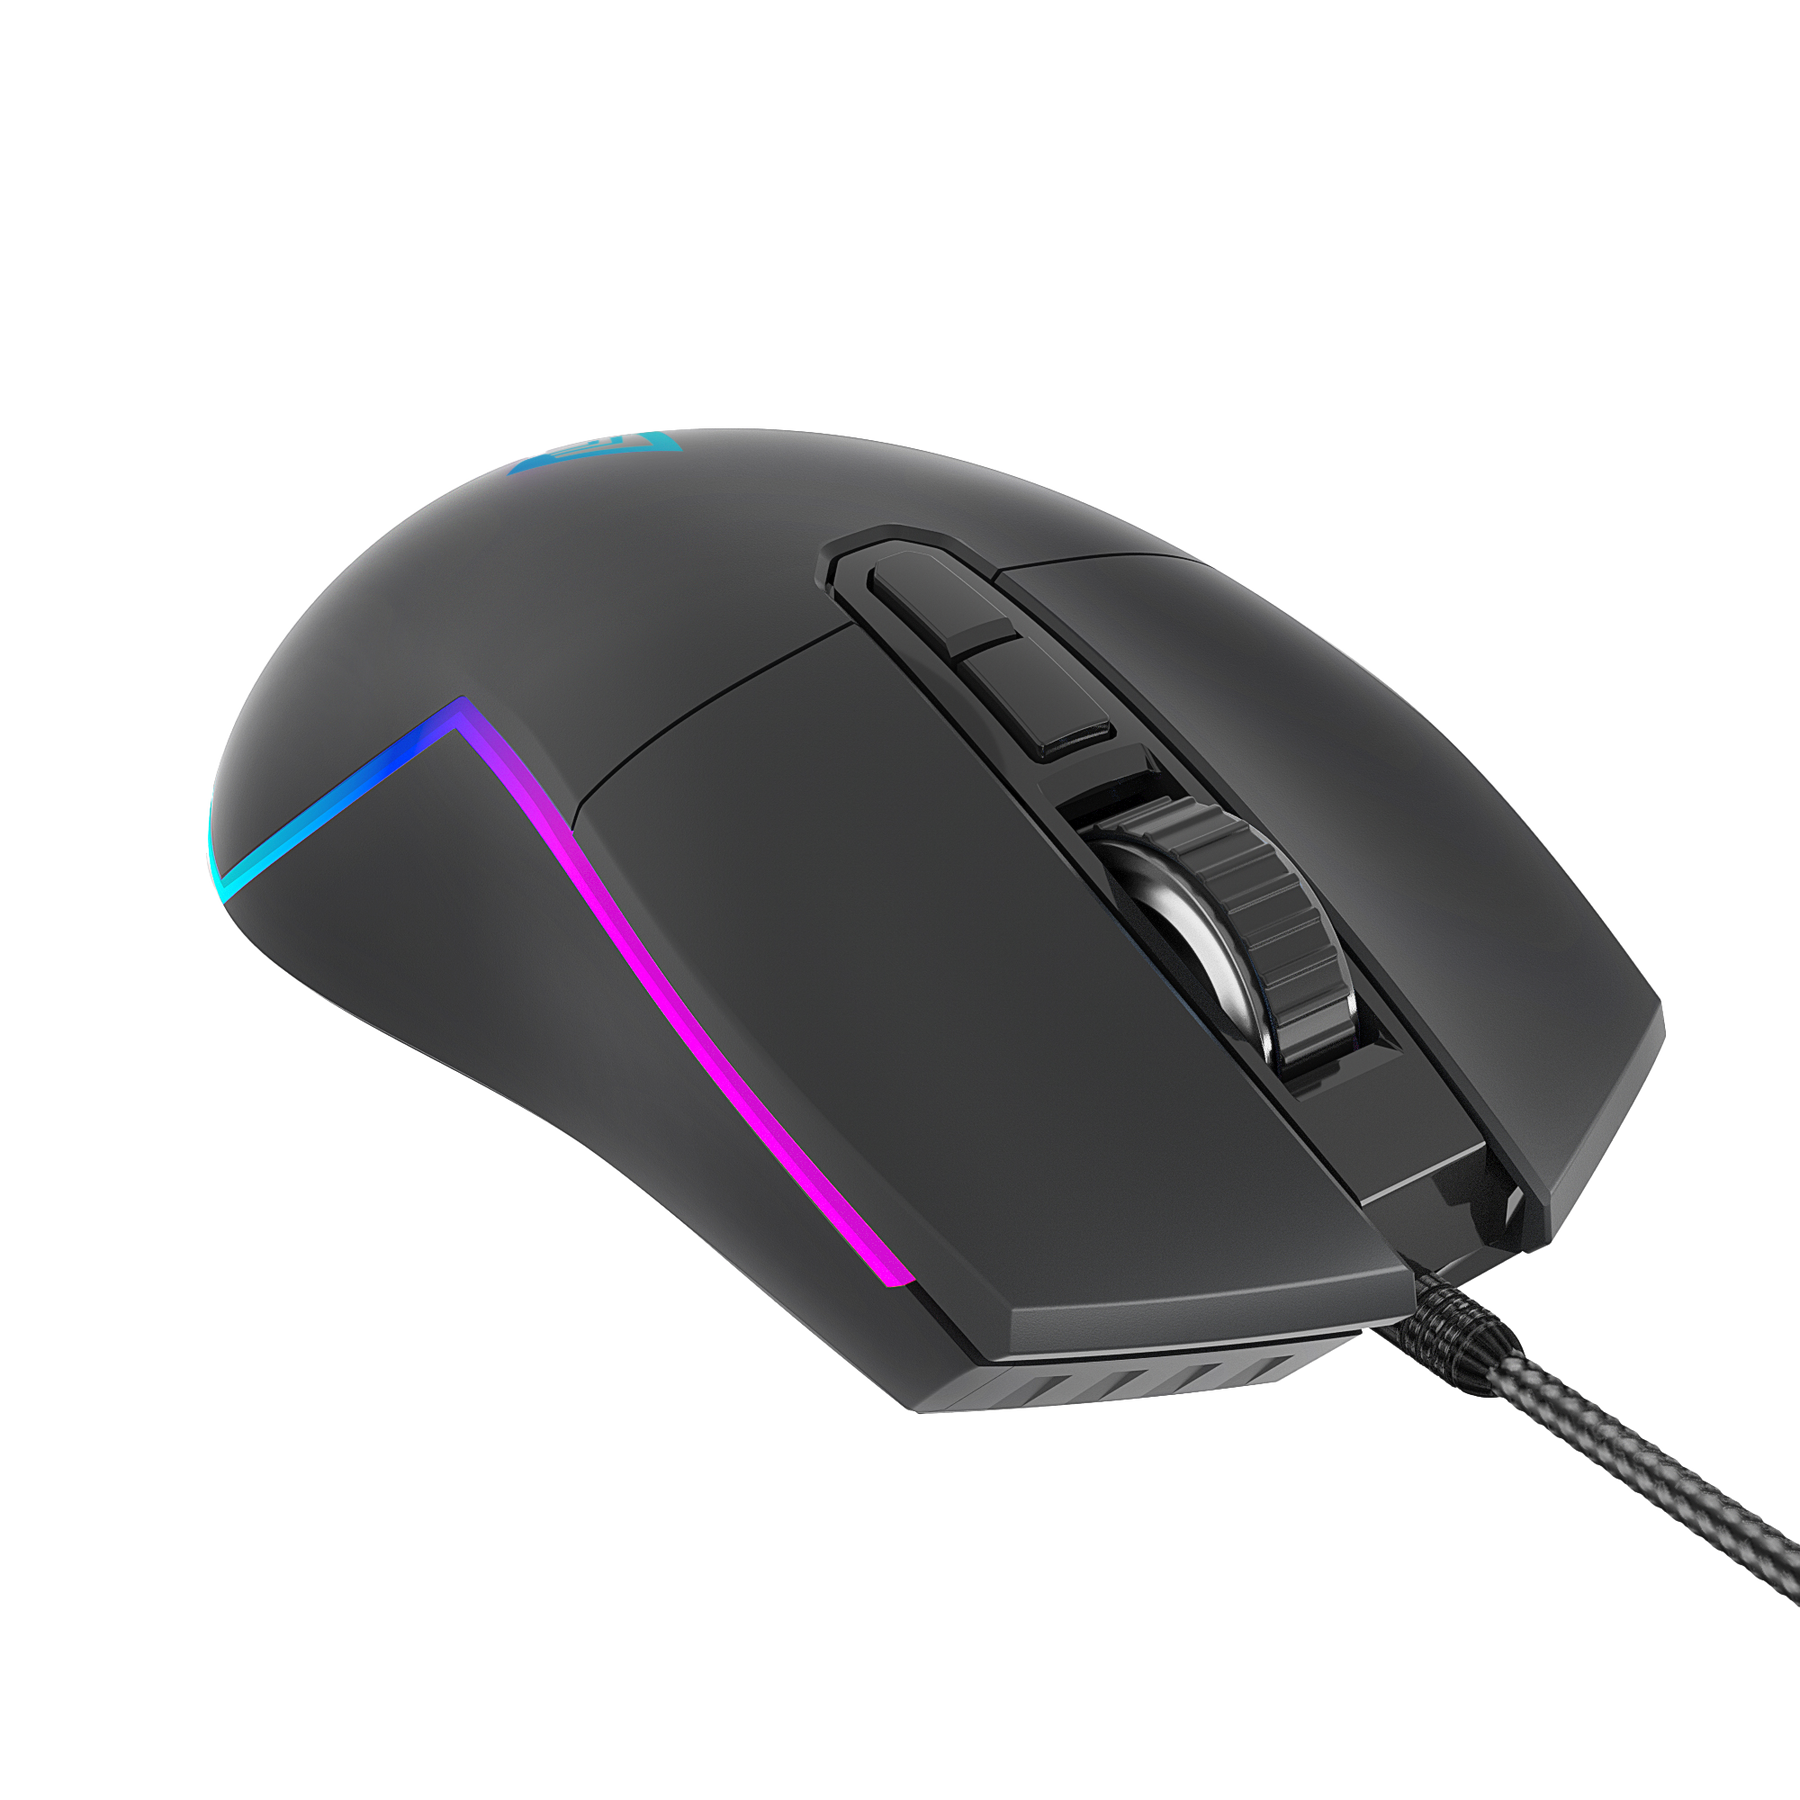 Recurve 500 RGB Gaming Mouse